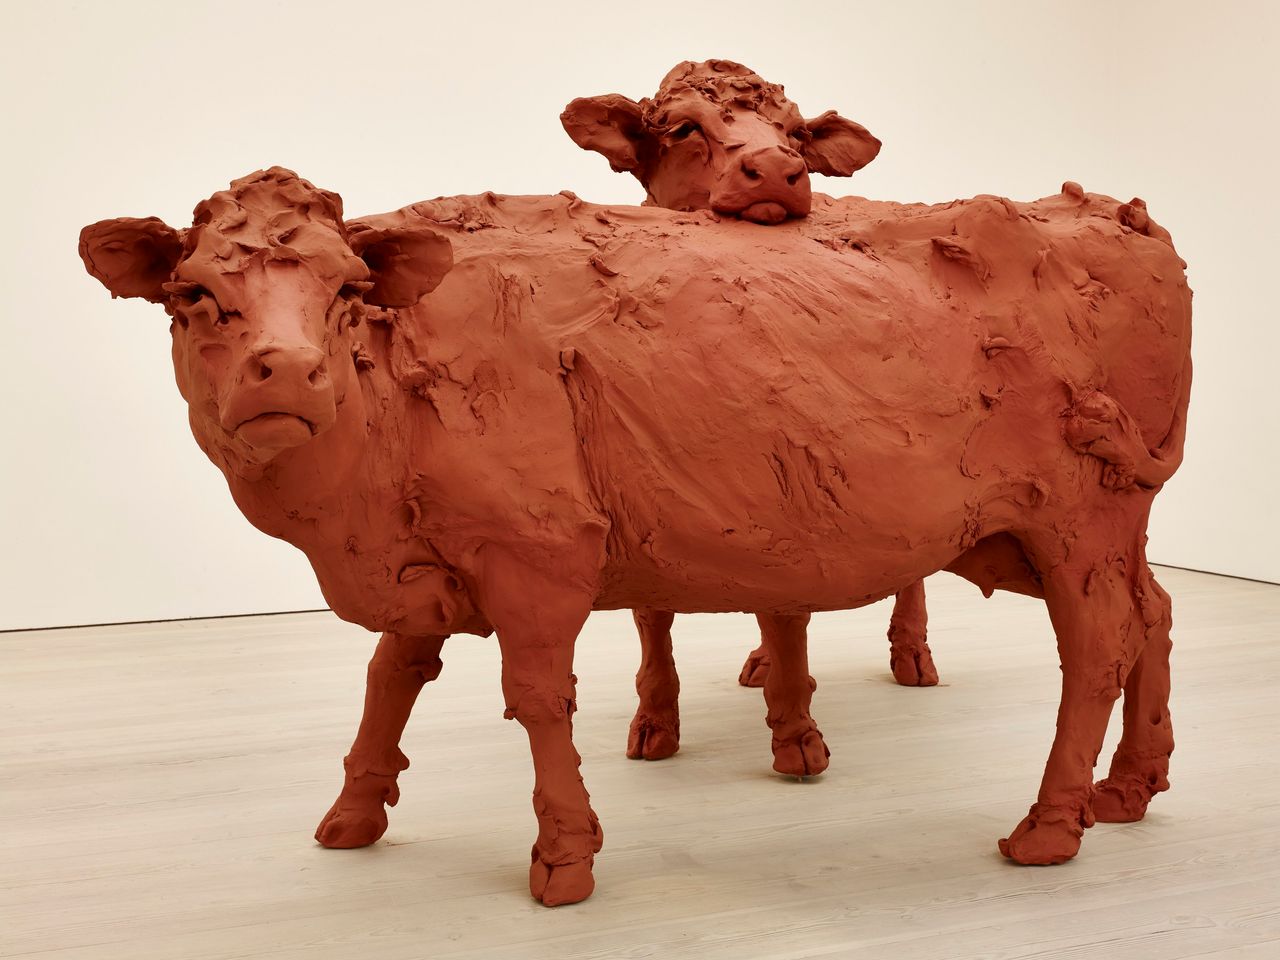 Stephanie Quayle, "Two Cows," 2013, air-hardening clay, chicken wire, steel, 230 x 340 x 170 cm, Image courtesy of the Saatchi Gallery, London.